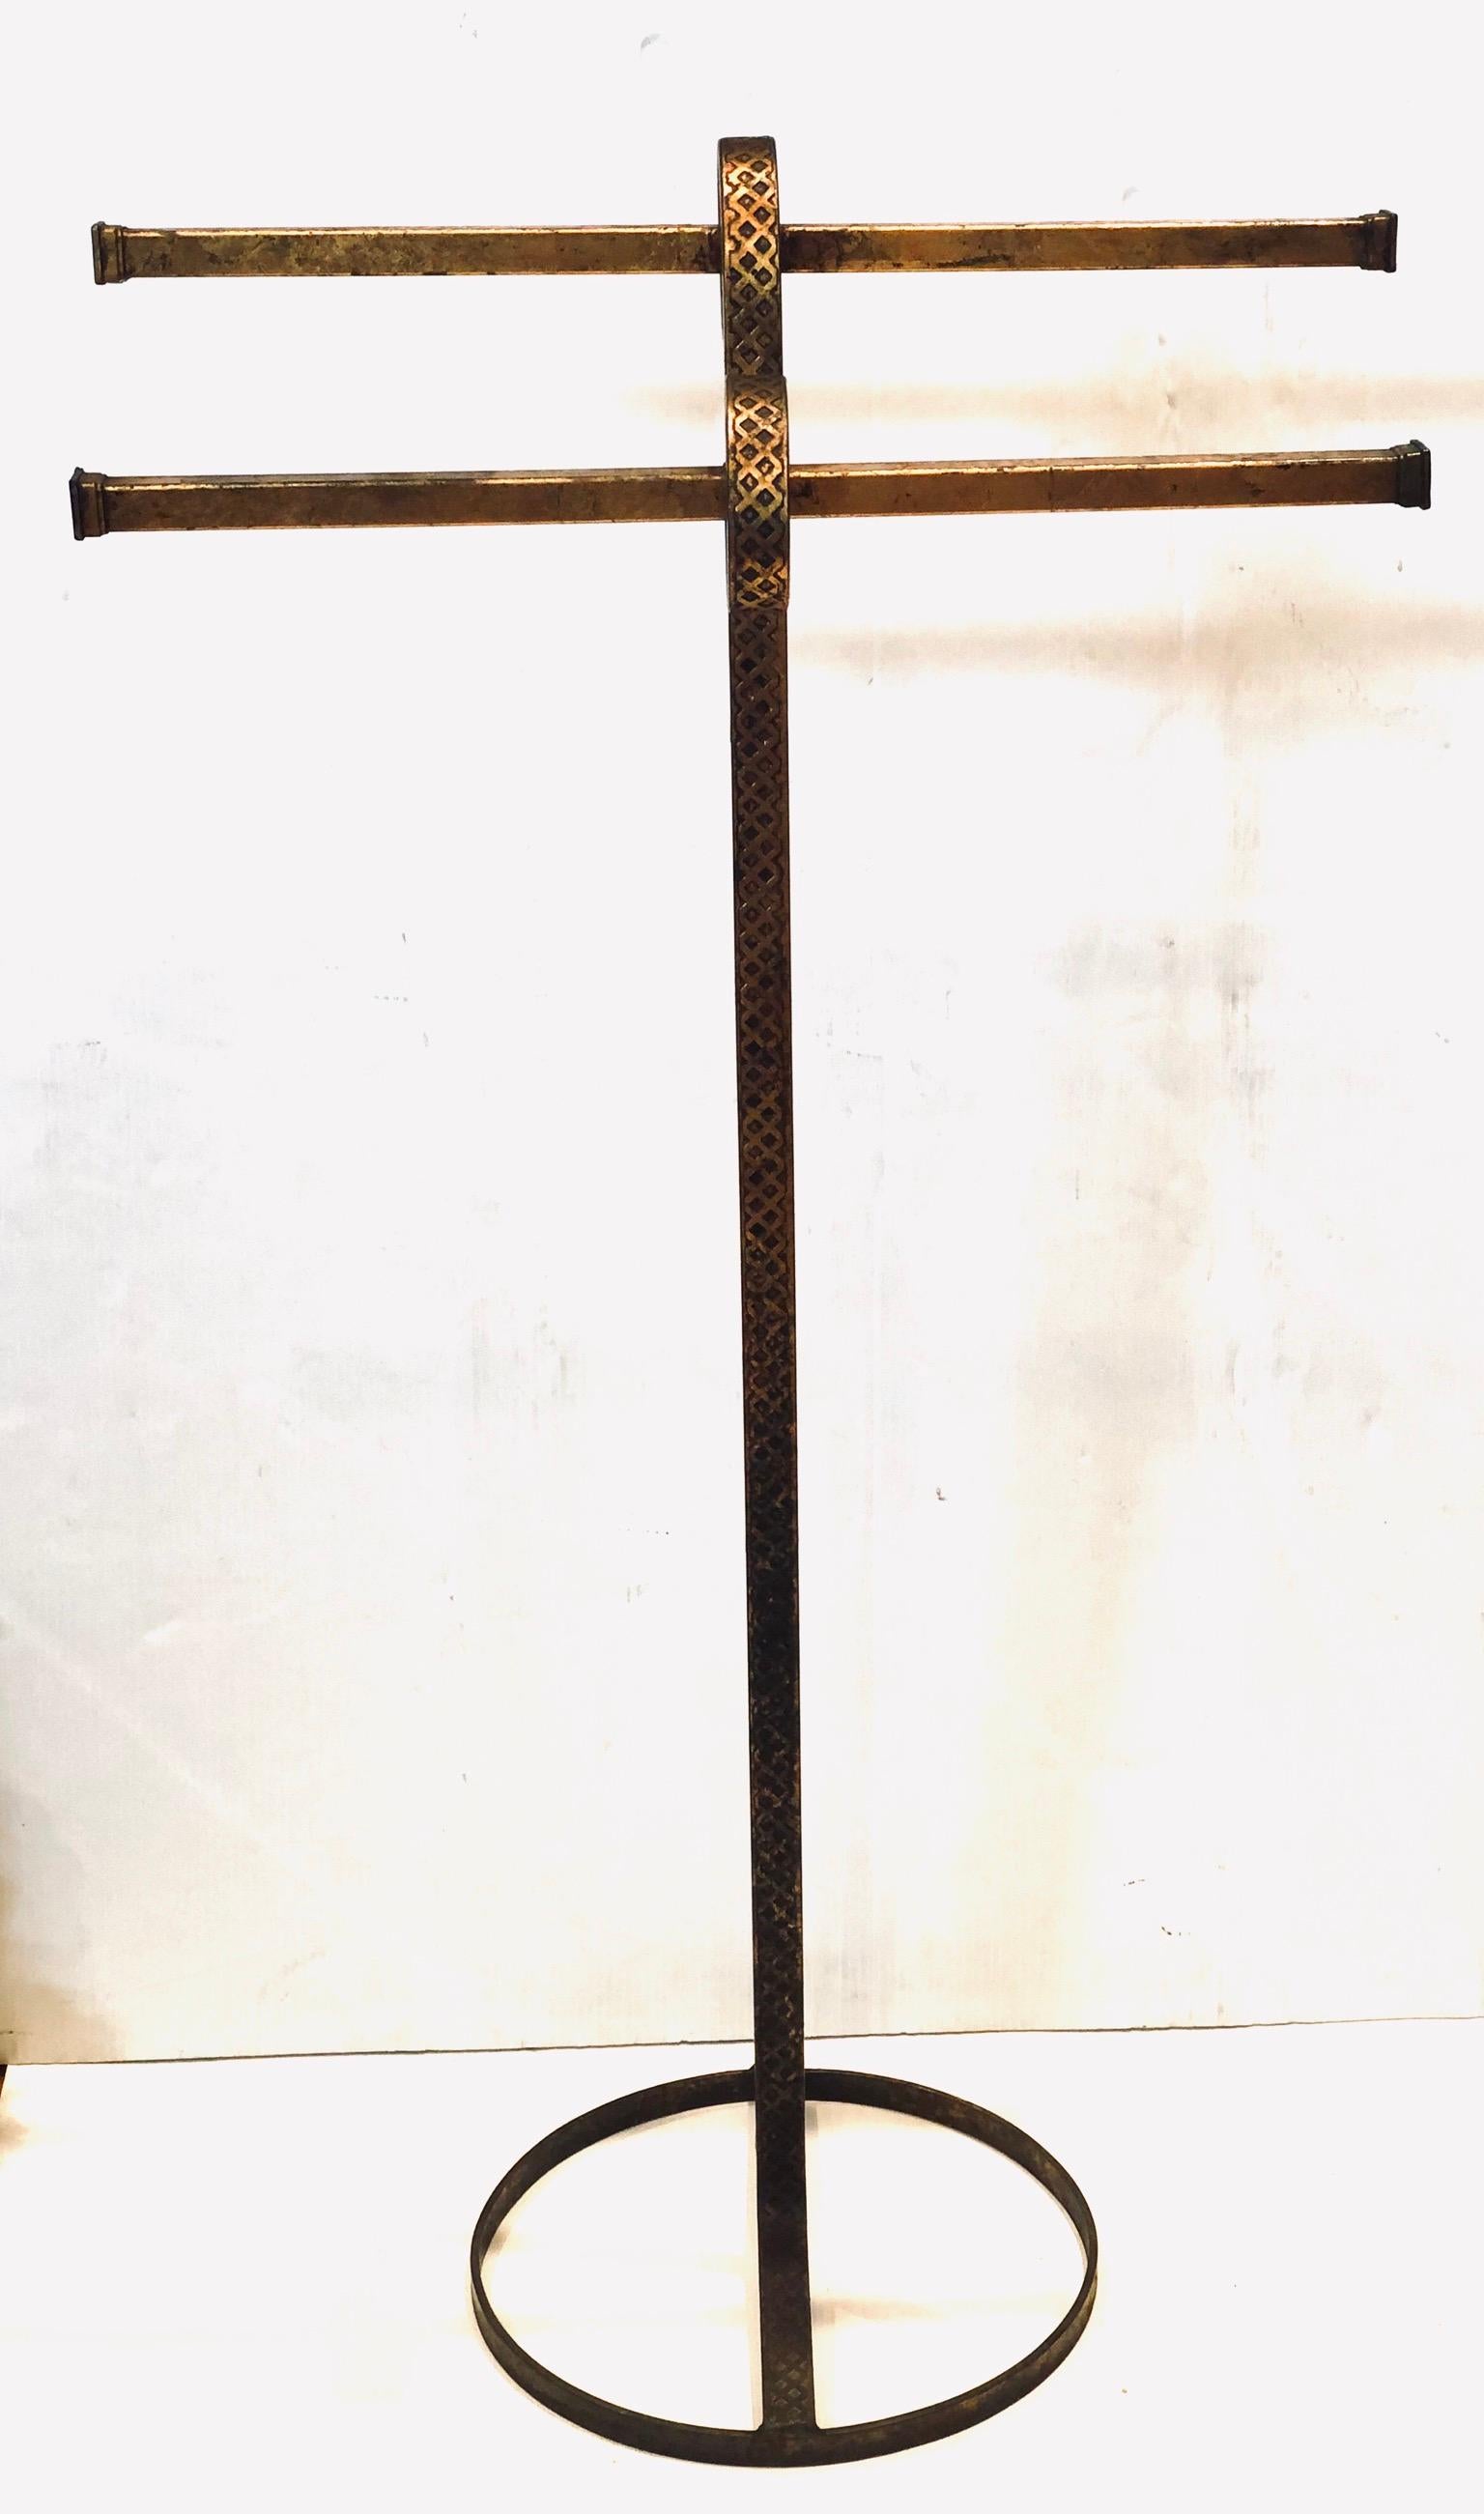 Elegant Italian gold guild towel holder, circa 1950s in original condition with 4 towels poles, hand-hammered iron
Detail well balanced.